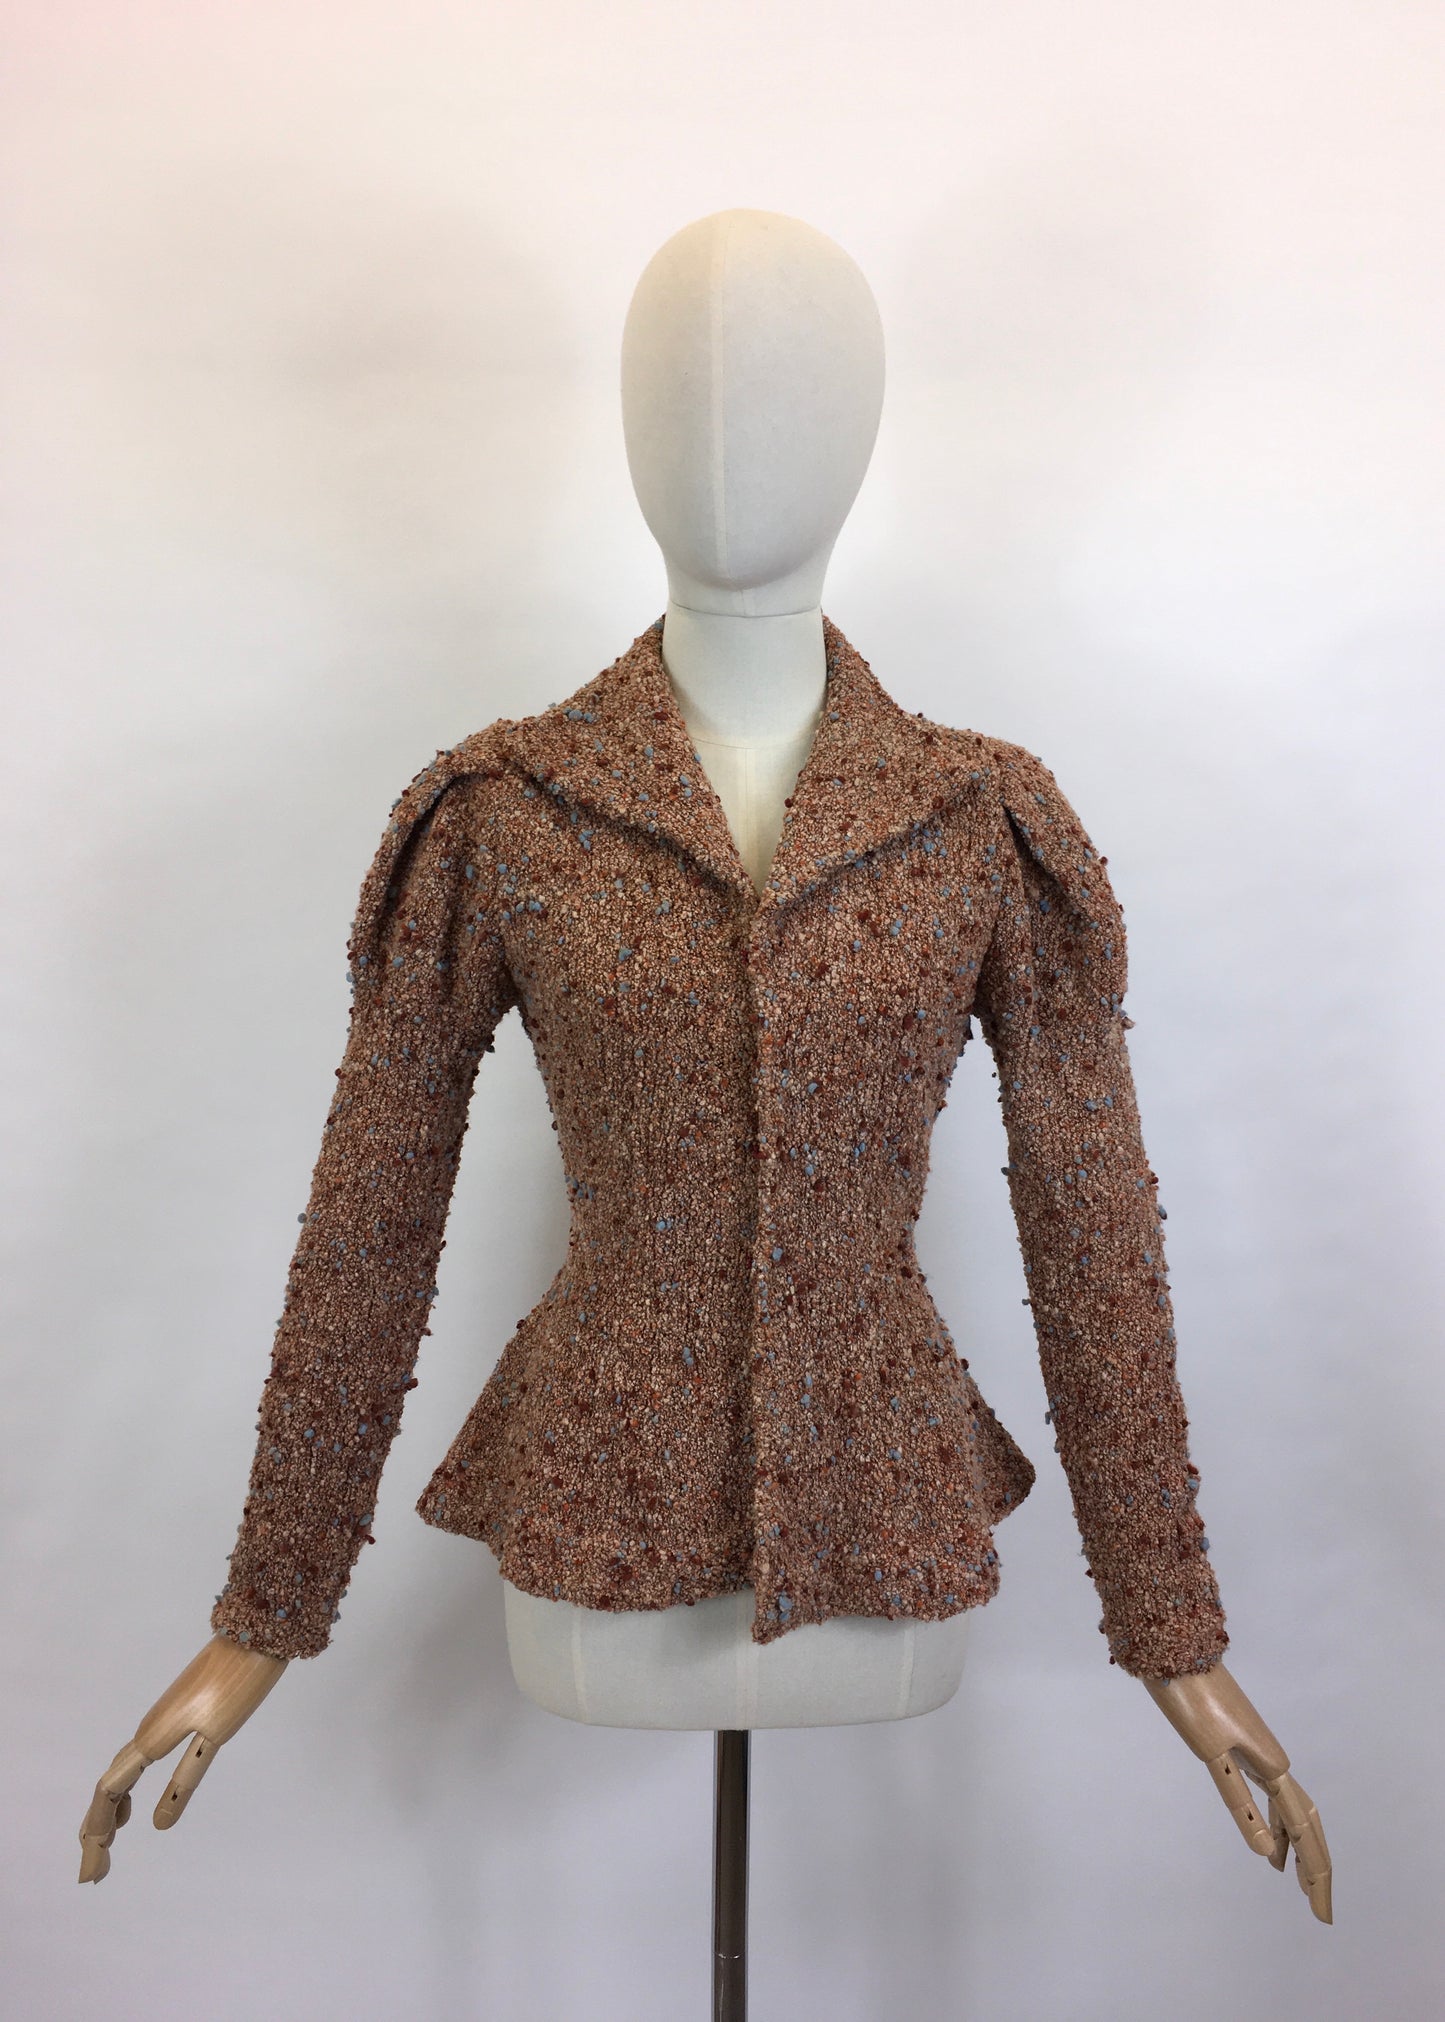 Original Late 1930’s Early 1940’s Knitted Cardigan / Jacket - In Pumpkin Spice, Soft Peach, Cinnamon and Powder Blue